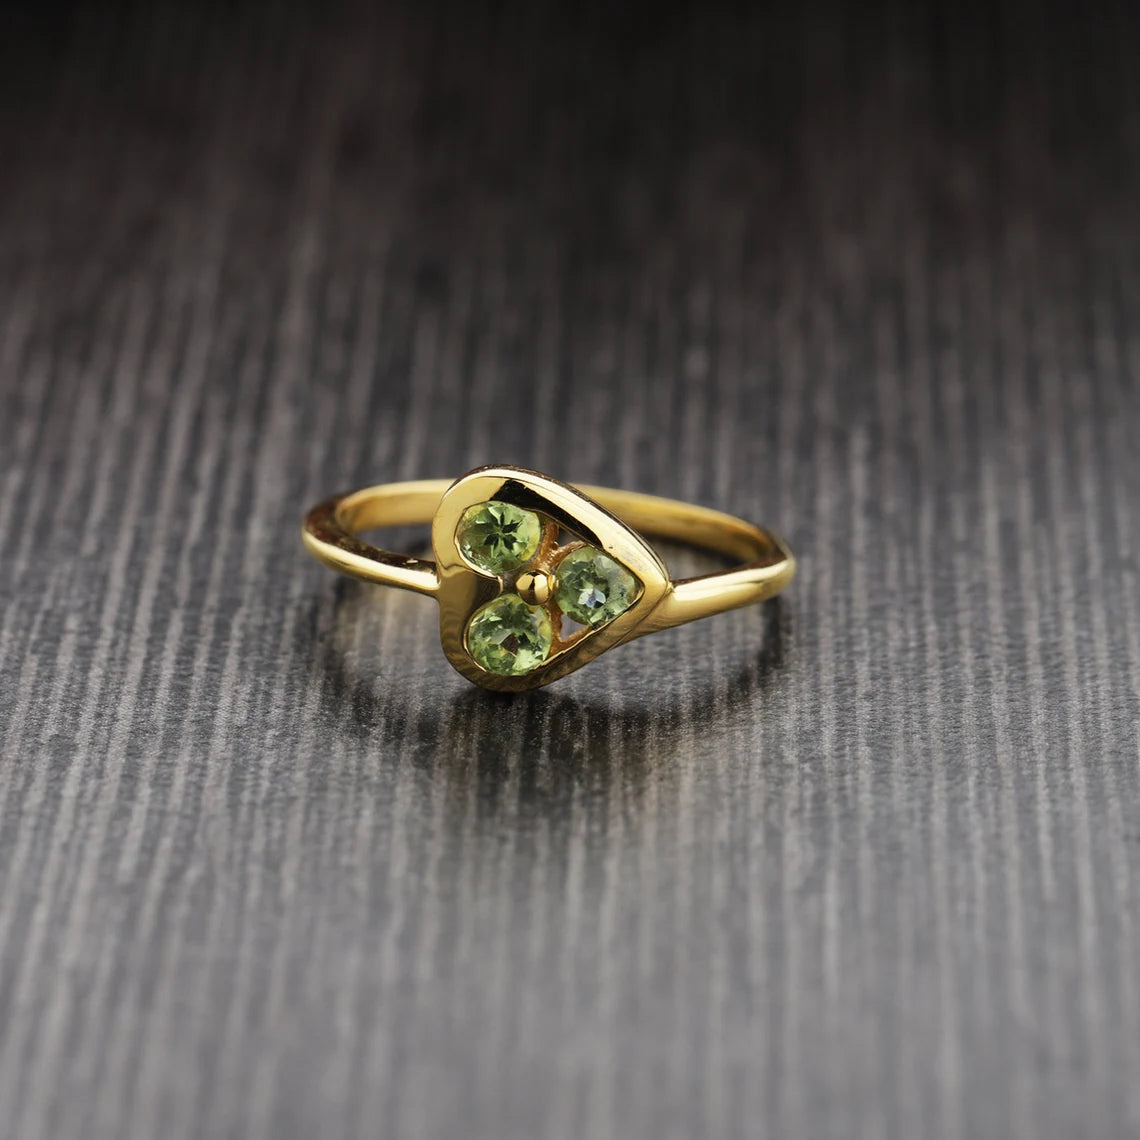 Peridot Heart Ring - Gold Ring - Stacking Sterling Silver Gold Plated Ring